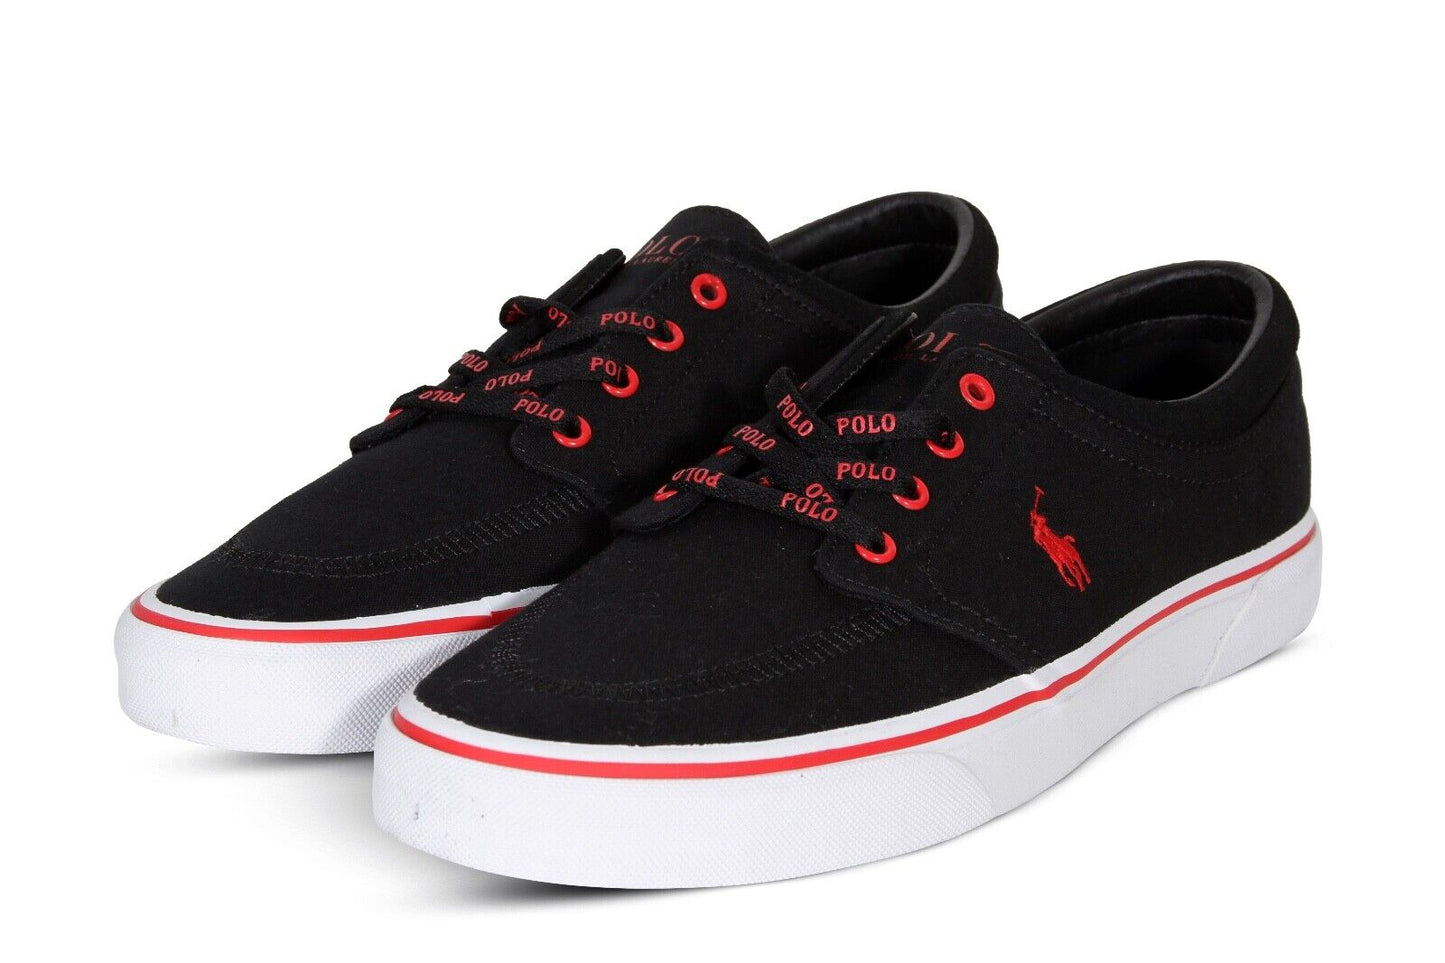 Polo Ralph Lauren Faxon X Men’s Canvas Sneakers in Black and Red 816841214002